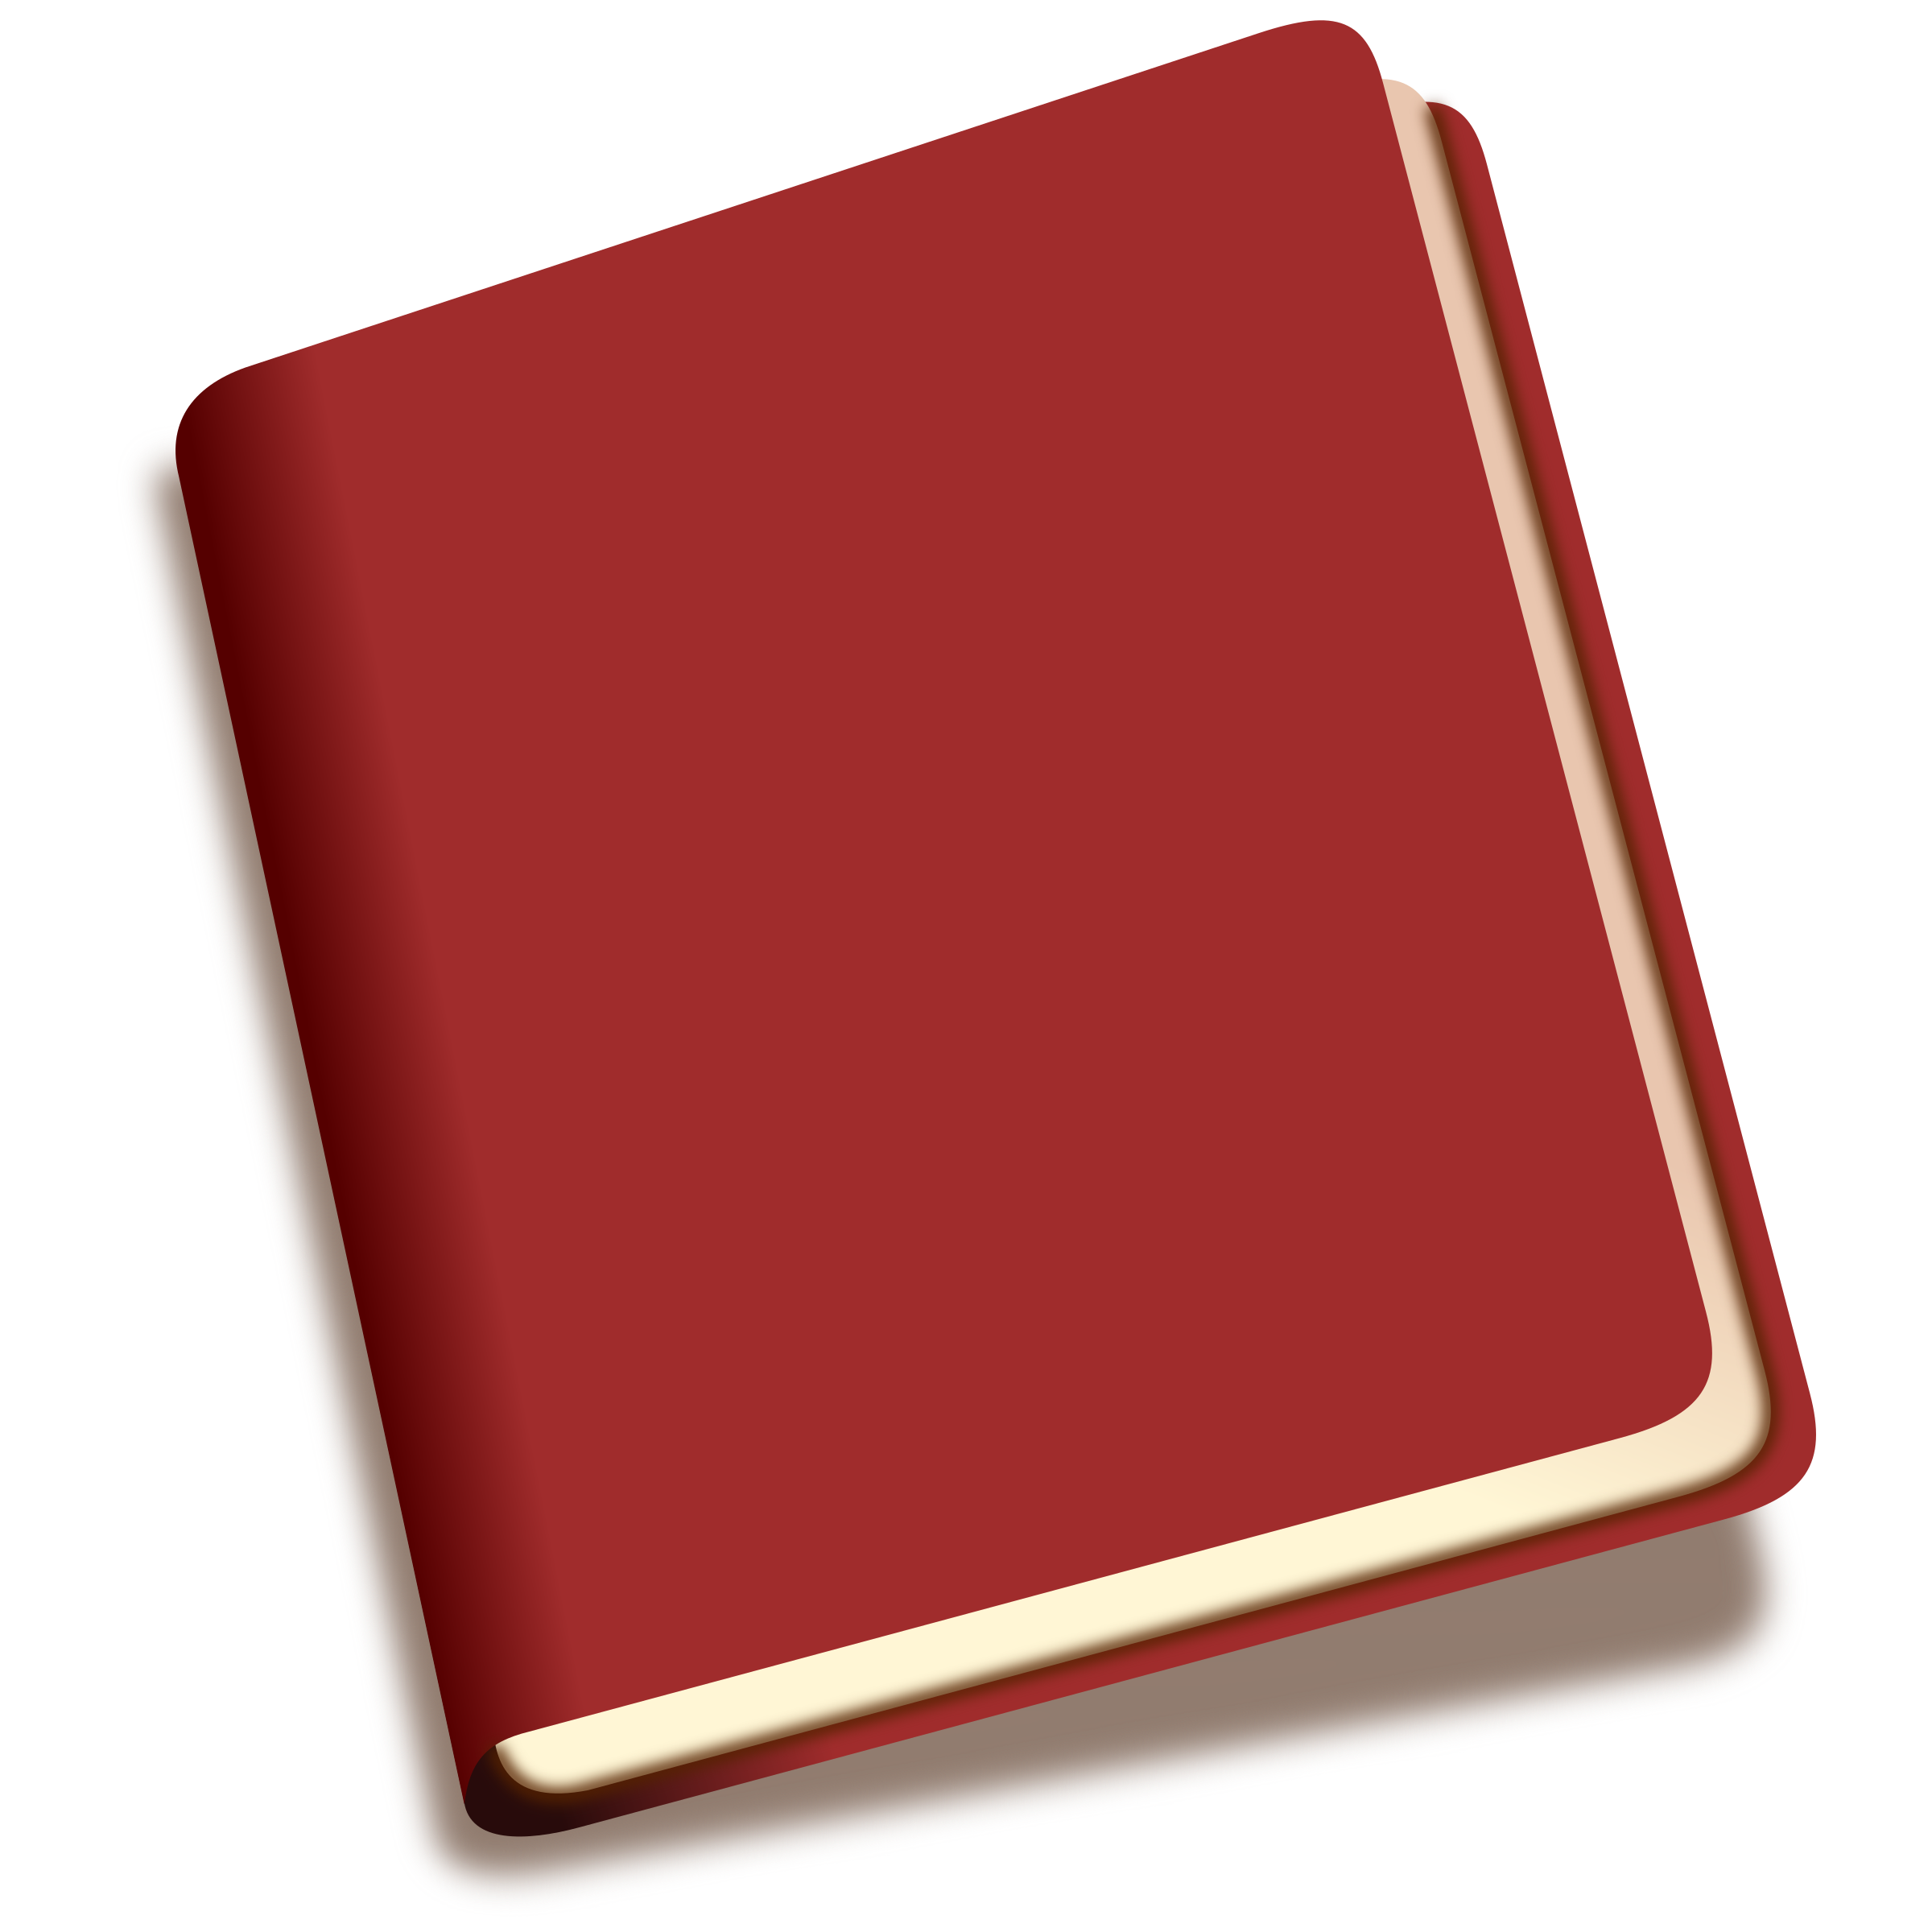 download red book picture transparent #41628